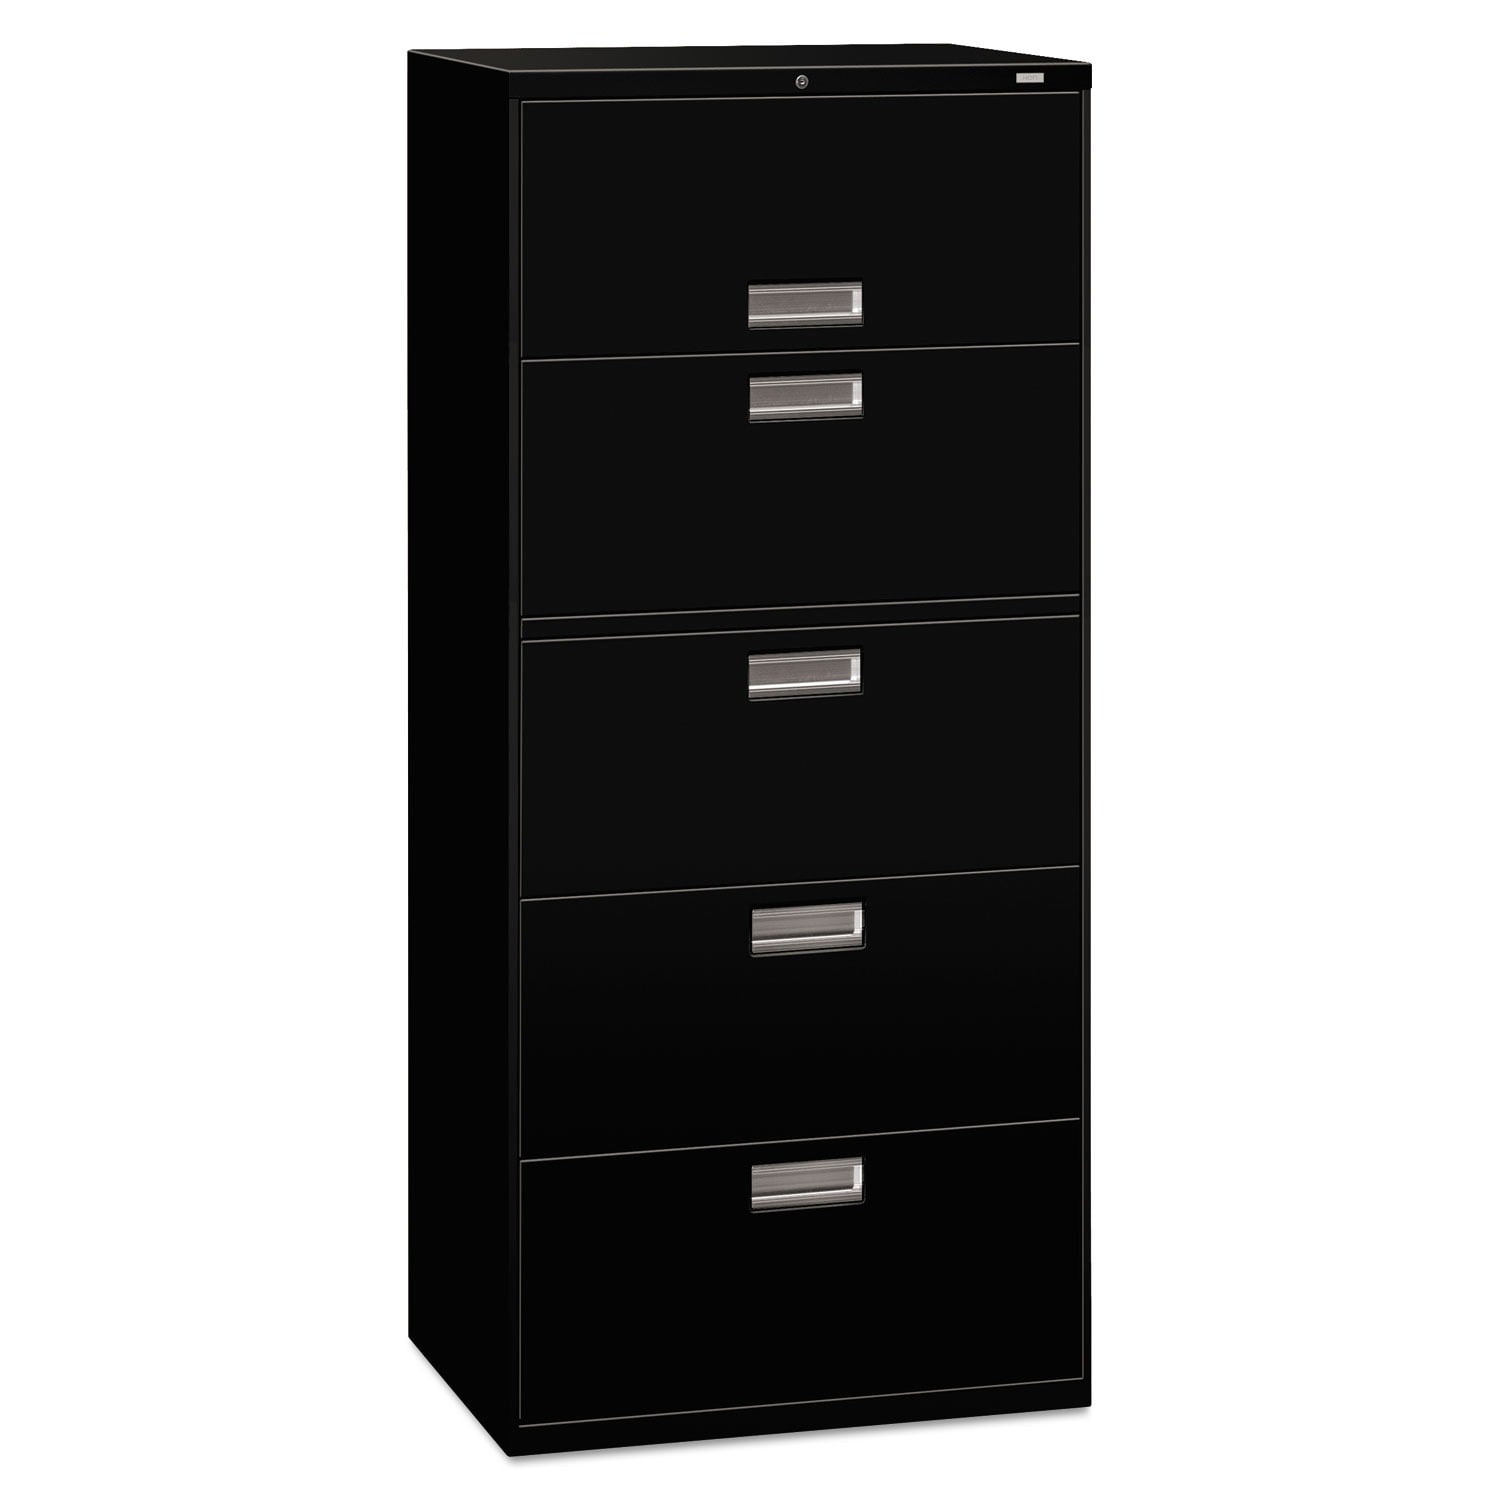 2 lengths available HON Lateral File Cabinet Hangrail 